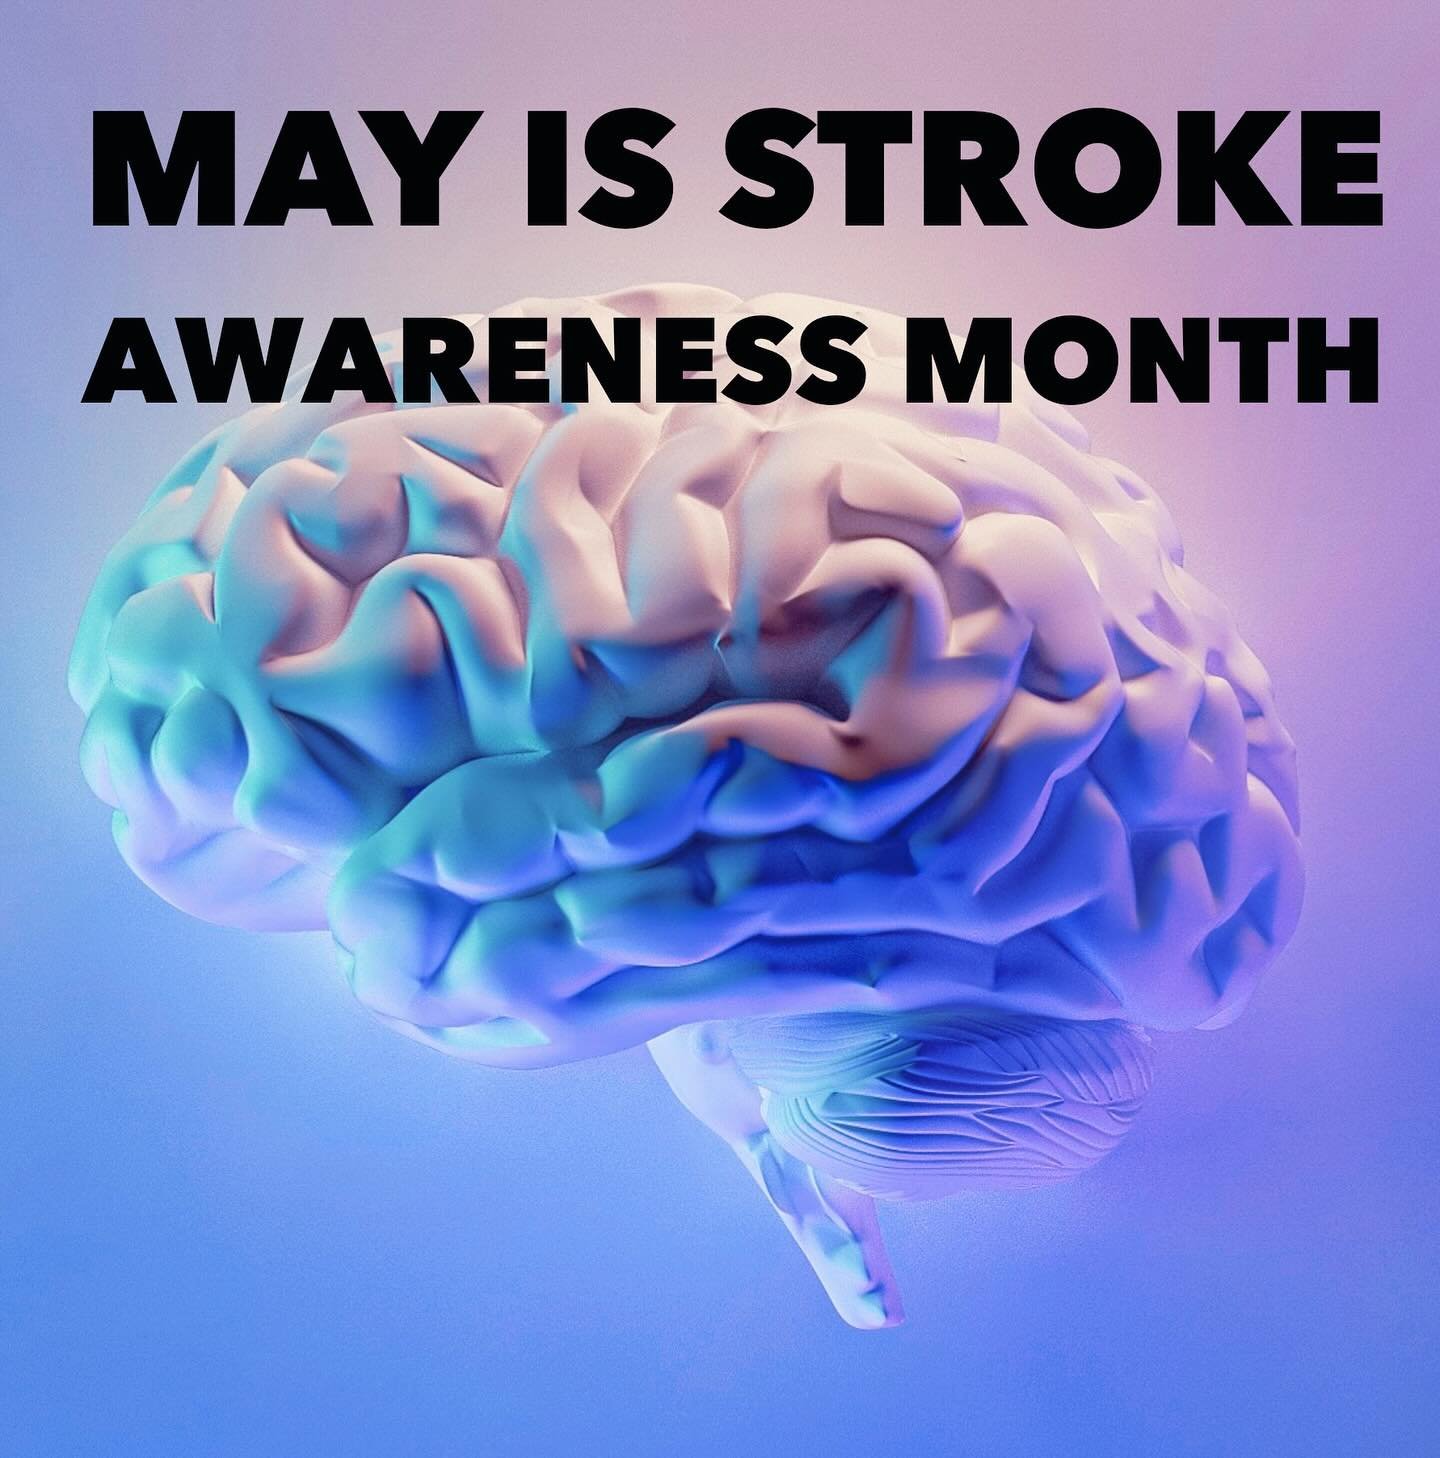 🌟 MAY is #StrokeAwarenessMonth! 🌟

Some #StrokeFacts ✅

In the USA:

🧠 Someone has a stroke every 40 seconds.

🧠 Stroke kills 2x as many women as breast cancer.

🧠 There are over 7 million stroke survivors.
 
🧠 Only 10% of them make a full reco